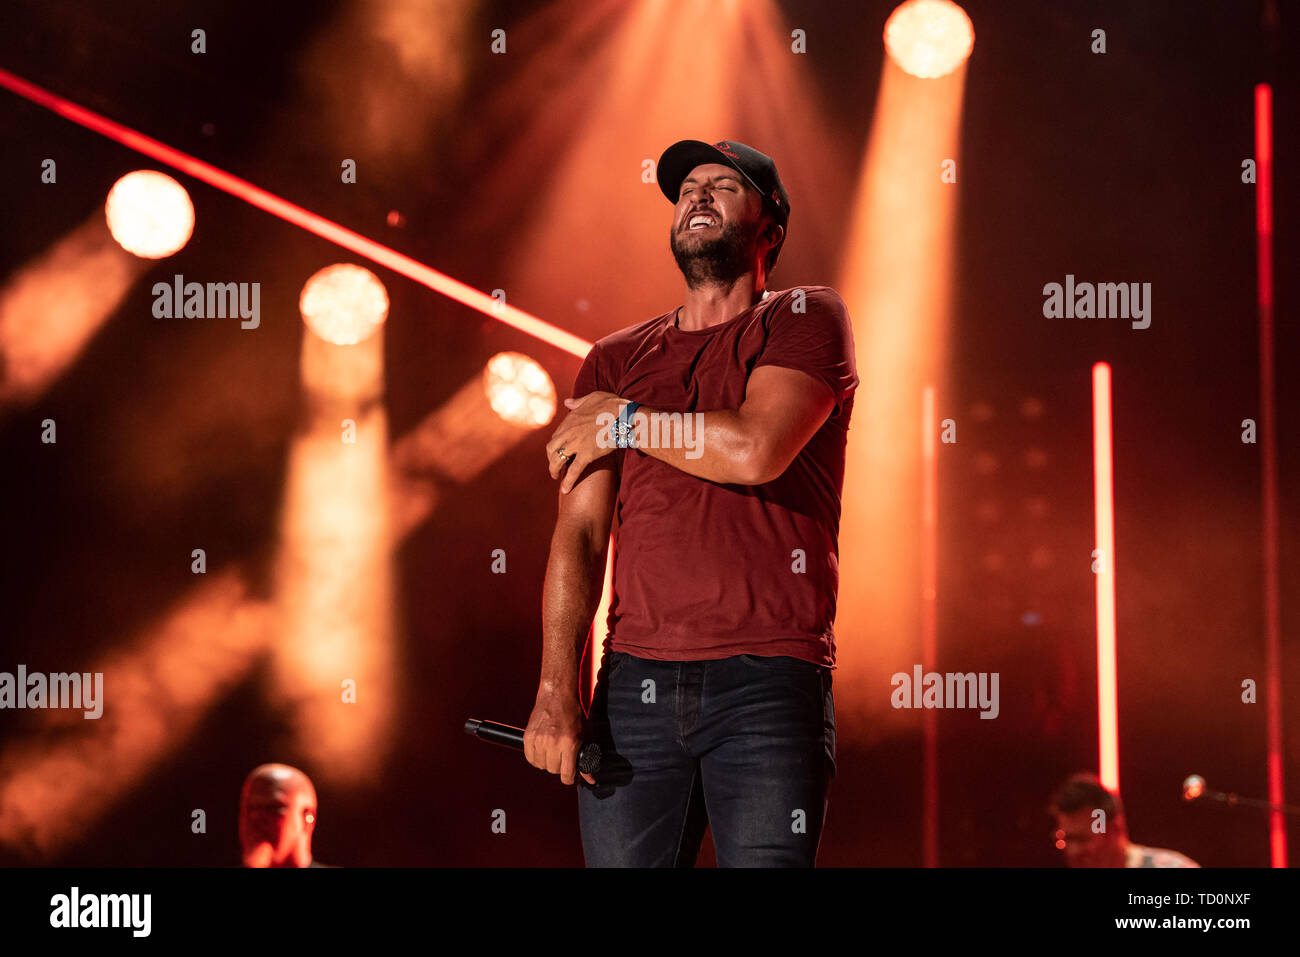 NASHVILLE, TENNESSEE - JUNE 09: Luke Bryan performs on stage for day 4 of the 2019 CMA Music Festival on June 09, 2019 in Nashville, Tennessee. Photo: Andrew Wendowski for imageSPACE/MediaPunch Stock Photo